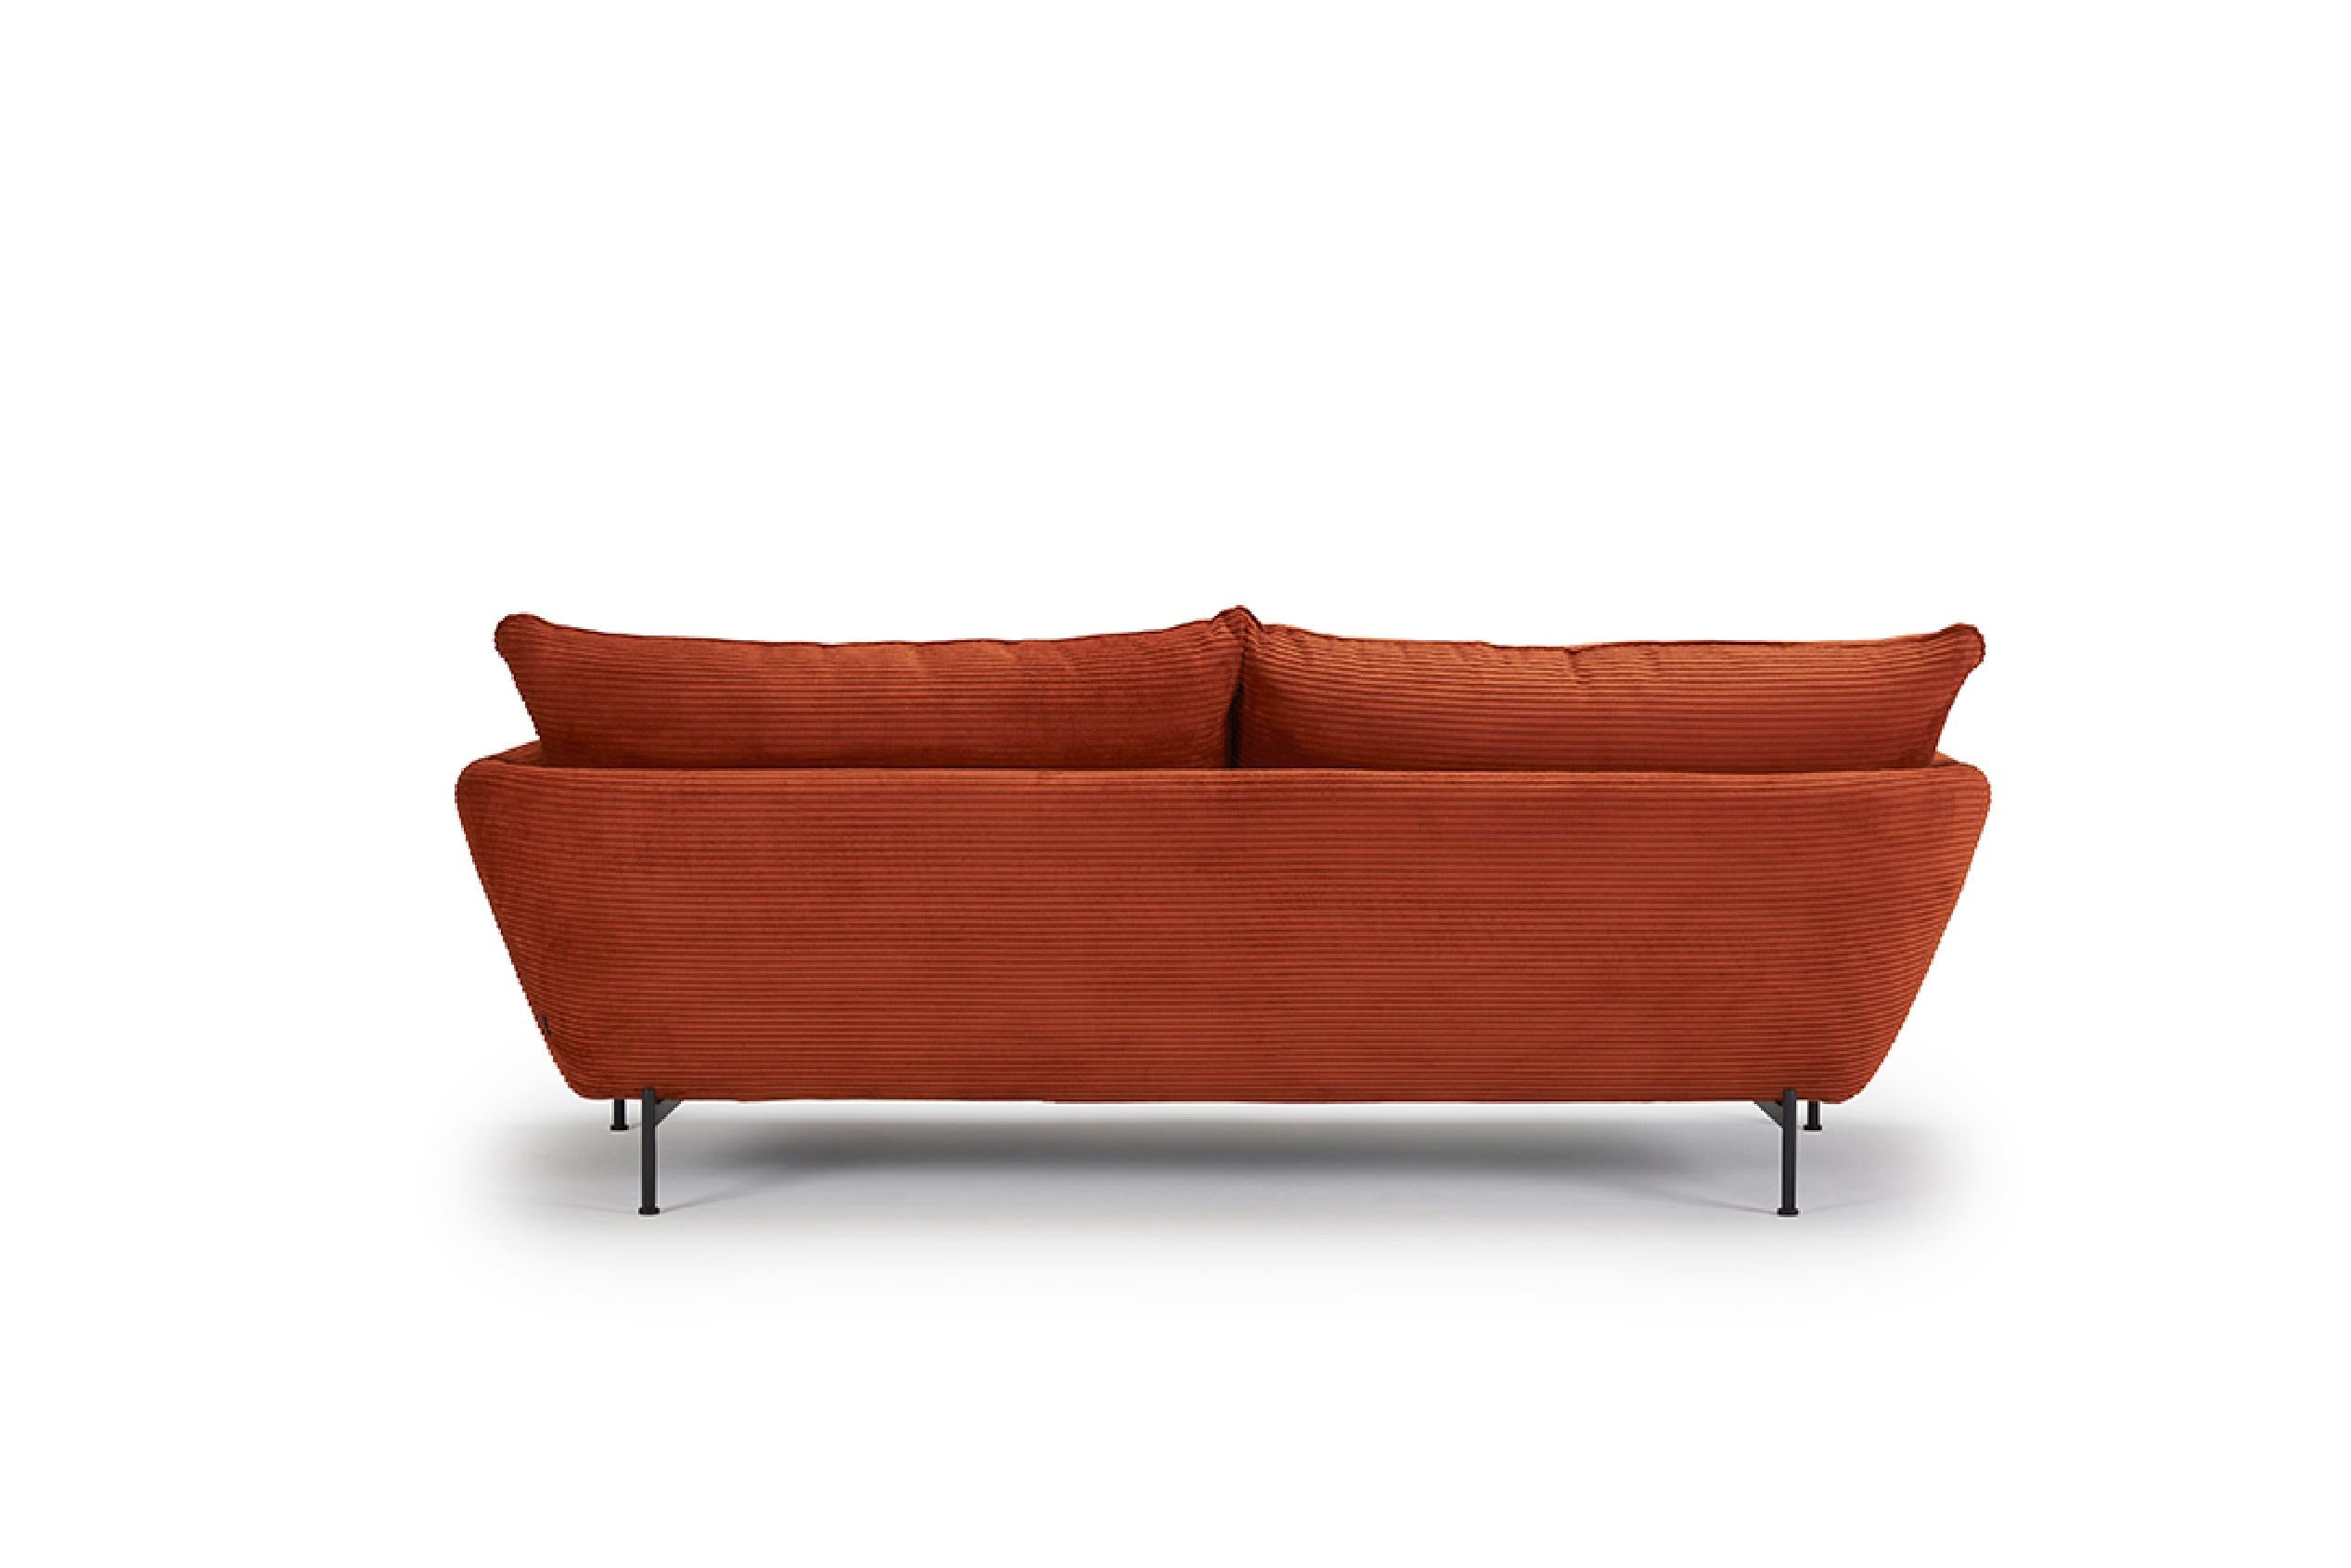 Metalwork Hayche Nave Lux 2 Seater Sofa - Red, UK, Made to Order For Sale